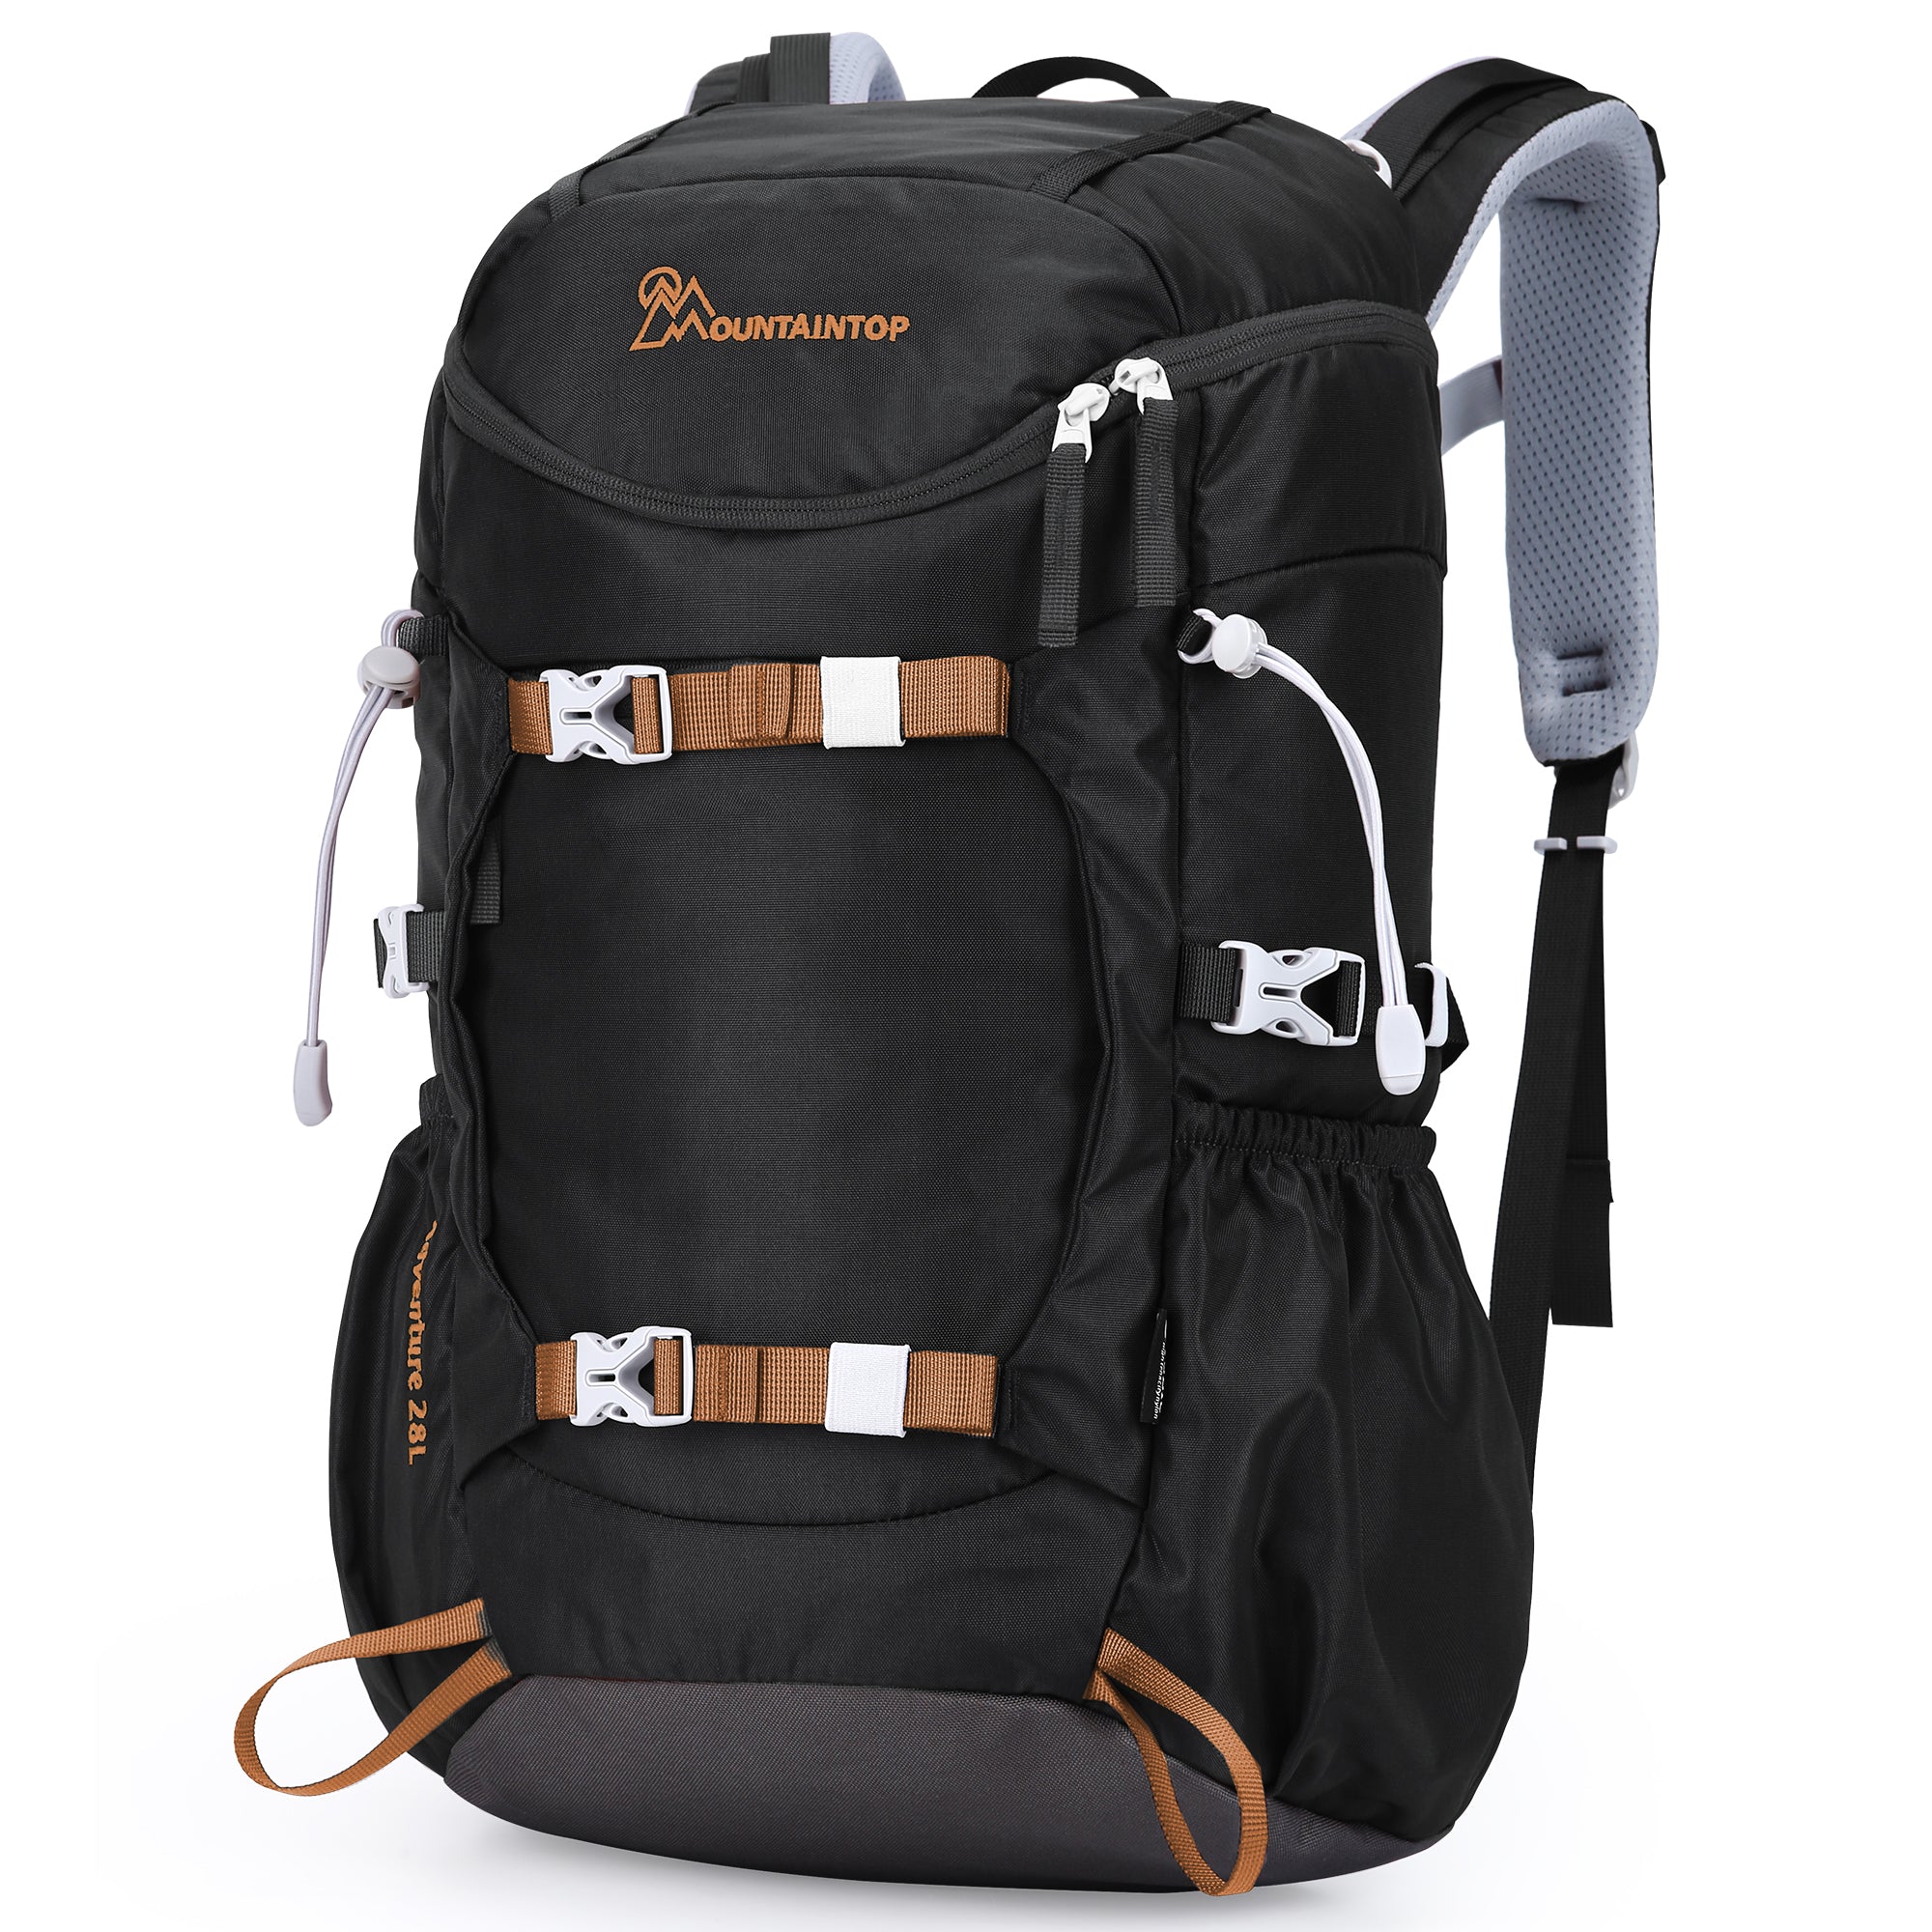 MOUNTAINTOP® 28L Hiking Backpack